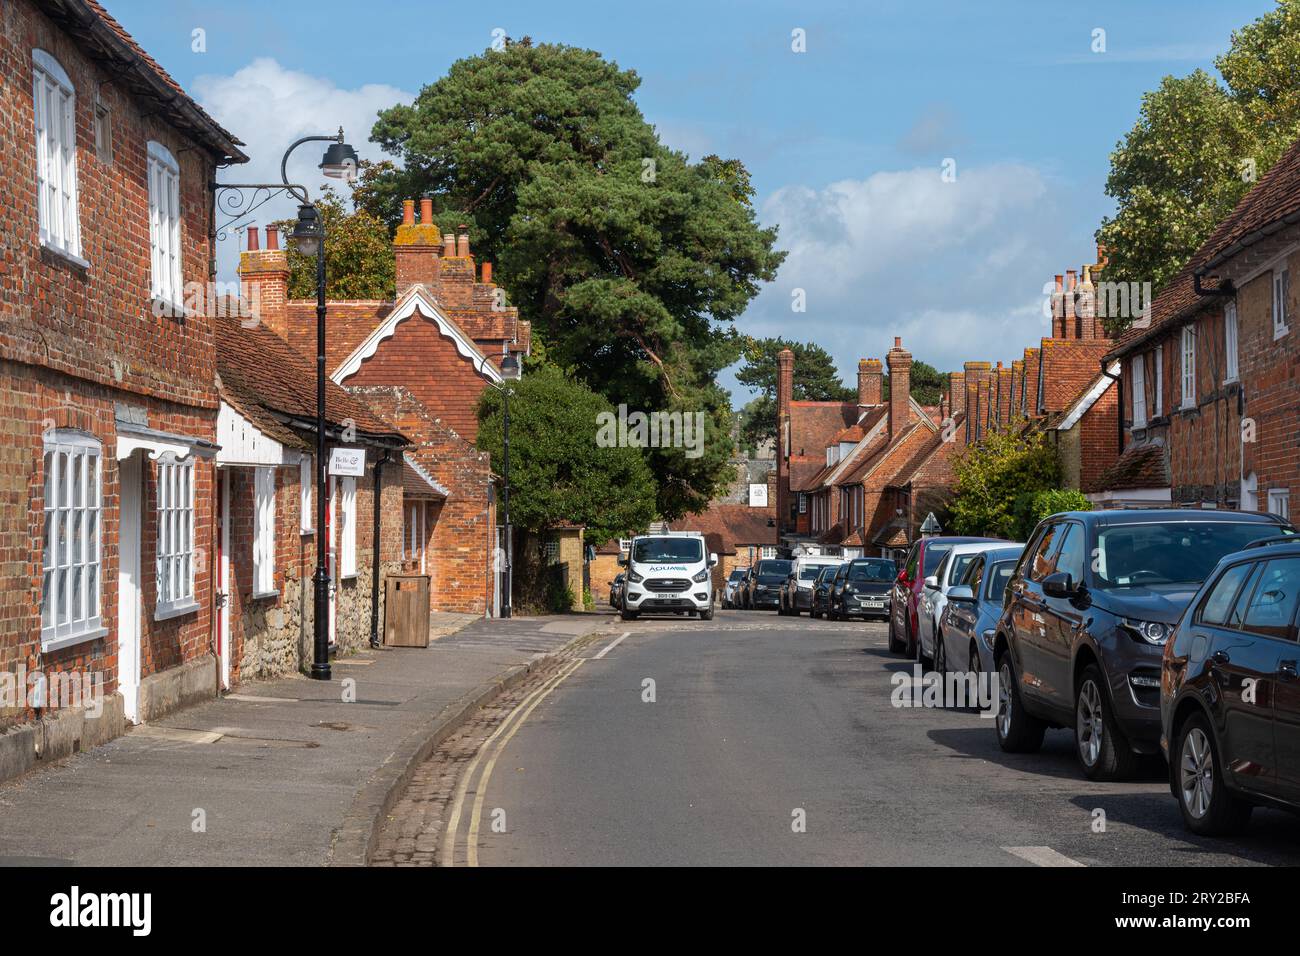 View of Beaulieu village high street in the New Forest, Hampshire, England, UK Stock Photo